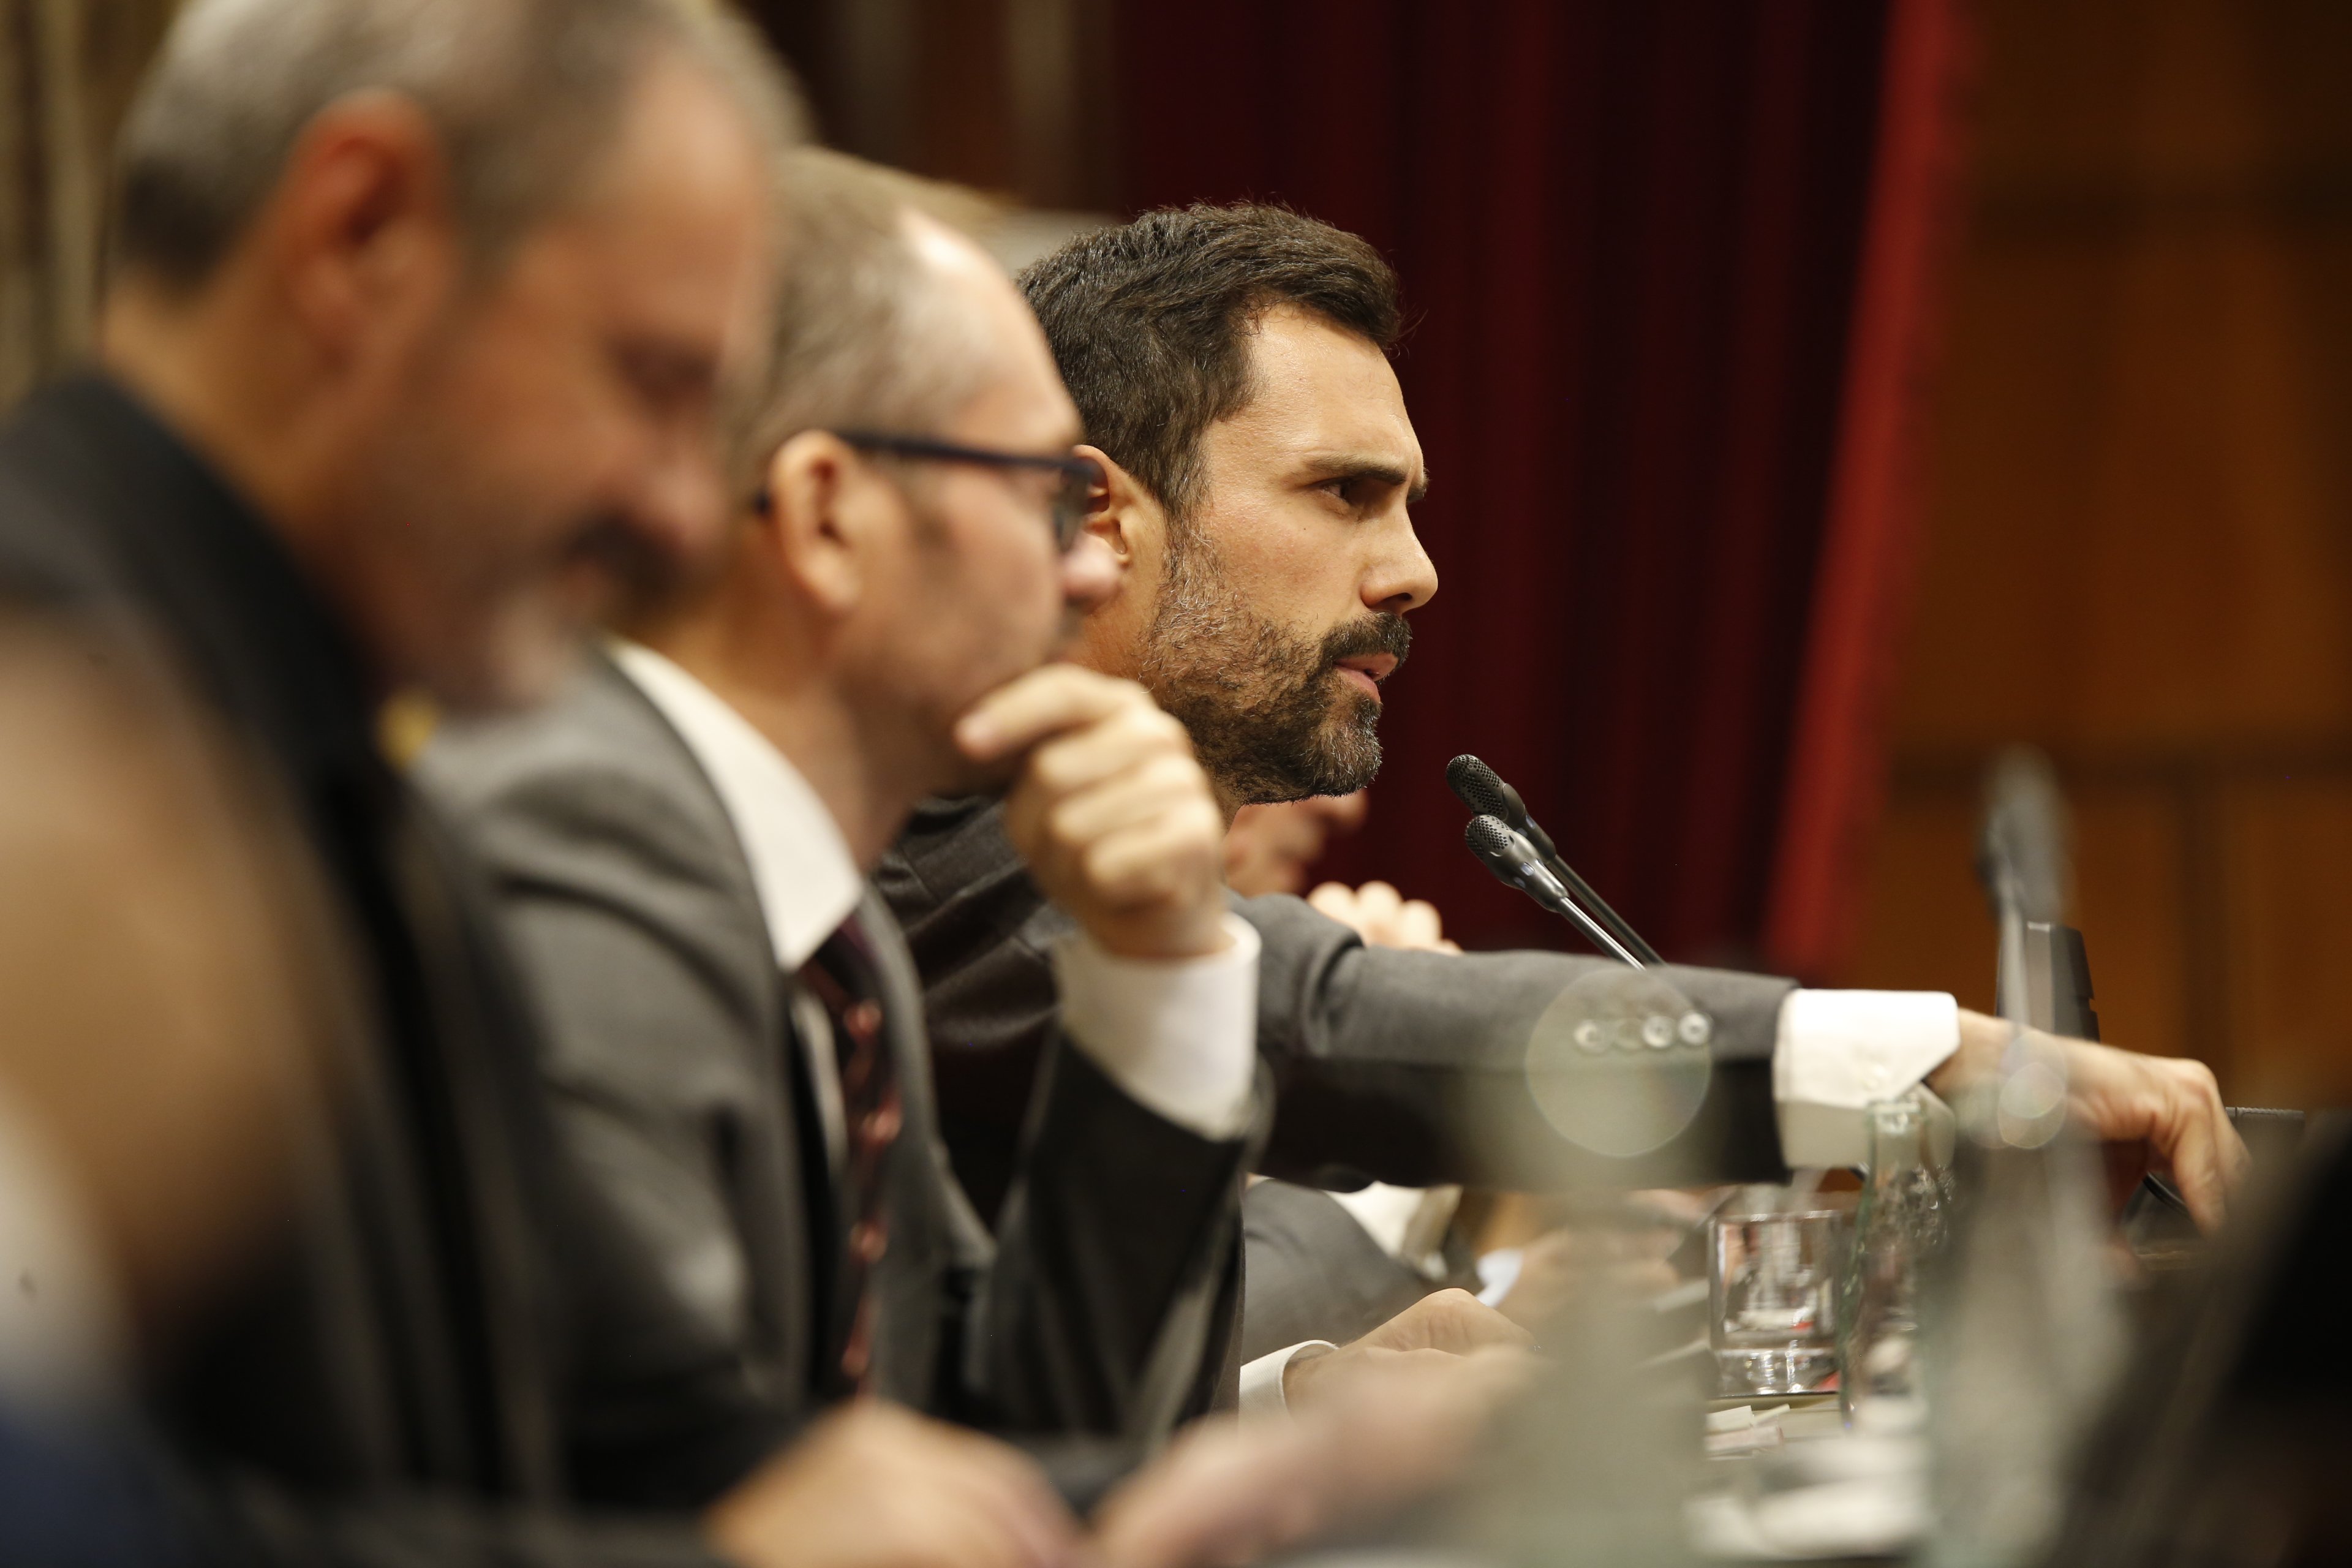 Prosecutors seek retrial of Roger Torrent and 3 other Catalan MPs who were acquitted